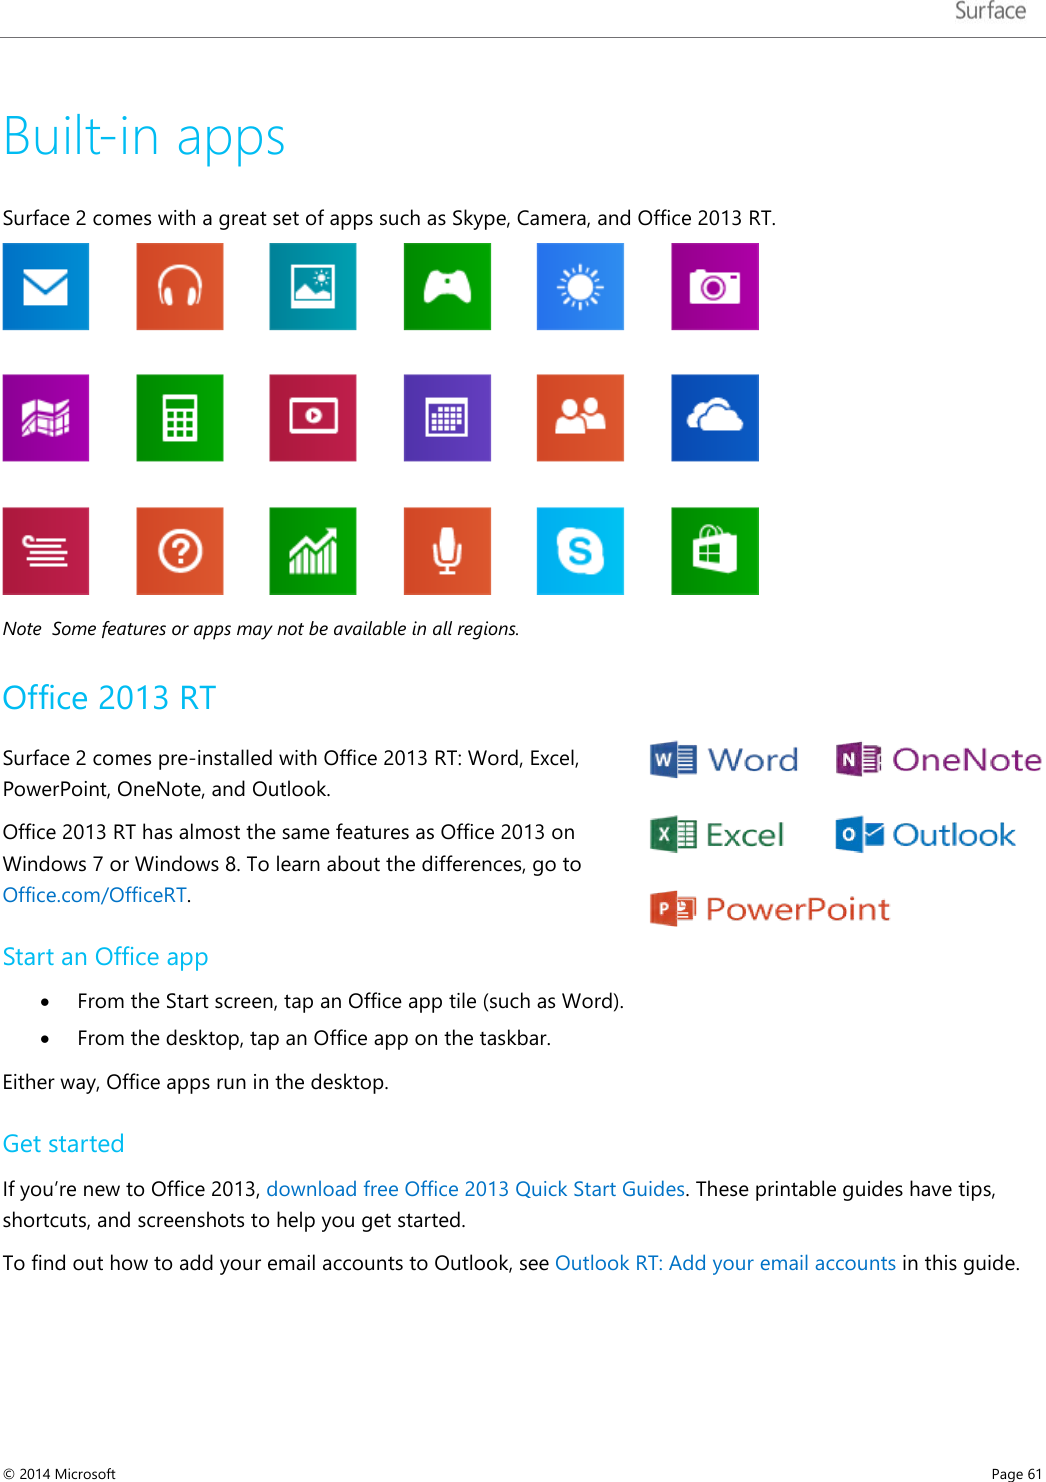   Built-in apps Surface 2 comes with a great set of apps such as Skype, Camera, and Office 2013 RT.  Note  Some features or apps may not be available in all regions. Office 2013 RT Surface 2 comes pre-installed with Office 2013 RT: Word, Excel, PowerPoint, OneNote, and Outlook. Office 2013 RT has almost the same features as Office 2013 on Windows 7 or Windows 8. To learn about the differences, go to Office.com/OfficeRT. Start an Office app • From the Start screen, tap an Office app tile (such as Word). • From the desktop, tap an Office app on the taskbar. Either way, Office apps run in the desktop.  Get started  If you’re new to Office 2013, download free Office 2013 Quick Start Guides. These printable guides have tips, shortcuts, and screenshots to help you get started.  To find out how to add your email accounts to Outlook, see Outlook RT: Add your email accounts in this guide. © 2014 Microsoft     Page 61  